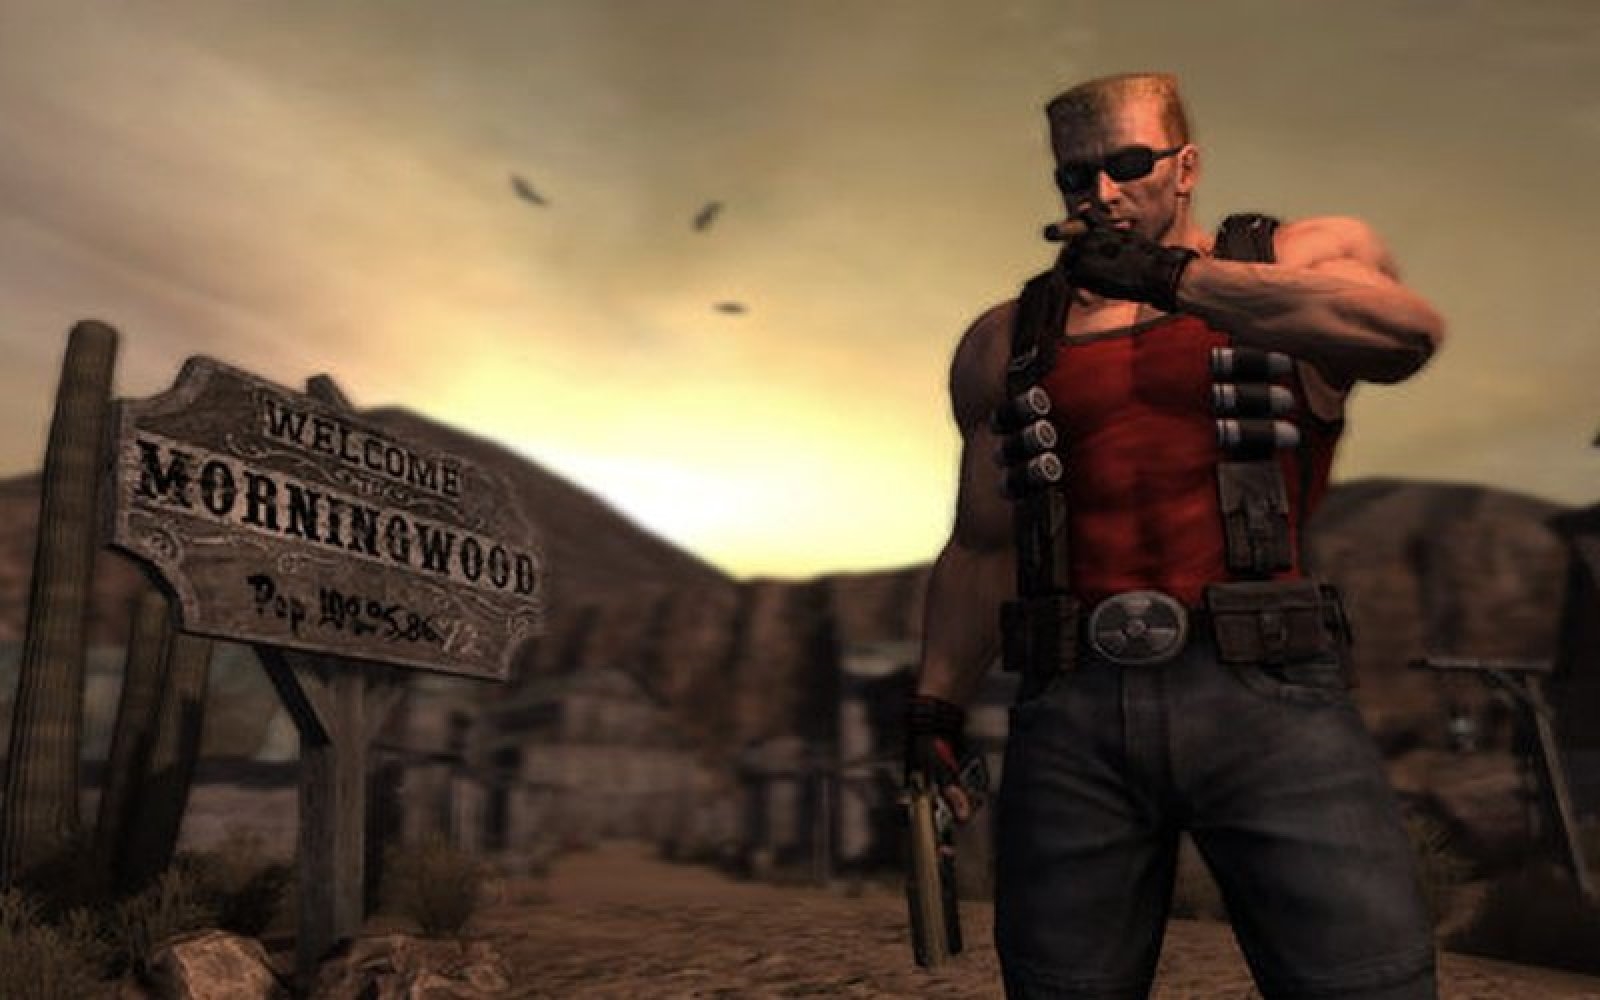 The voice of Duke Nukem is now officiating weddings | DeviceDaily.com